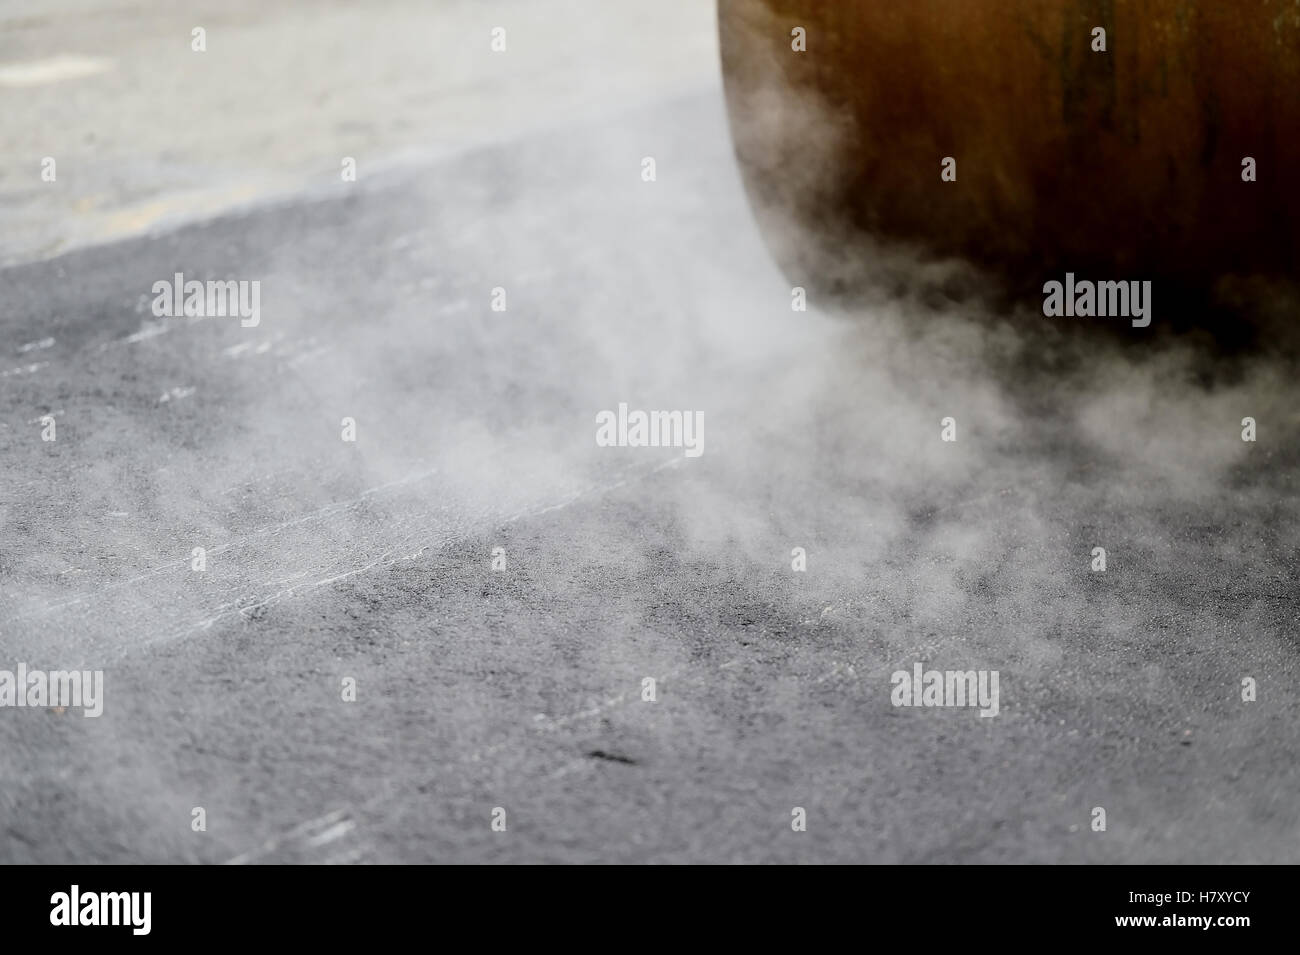 Asphalt paving with a steel wheel roller. Steam coming out from asphalt. Stock Photo